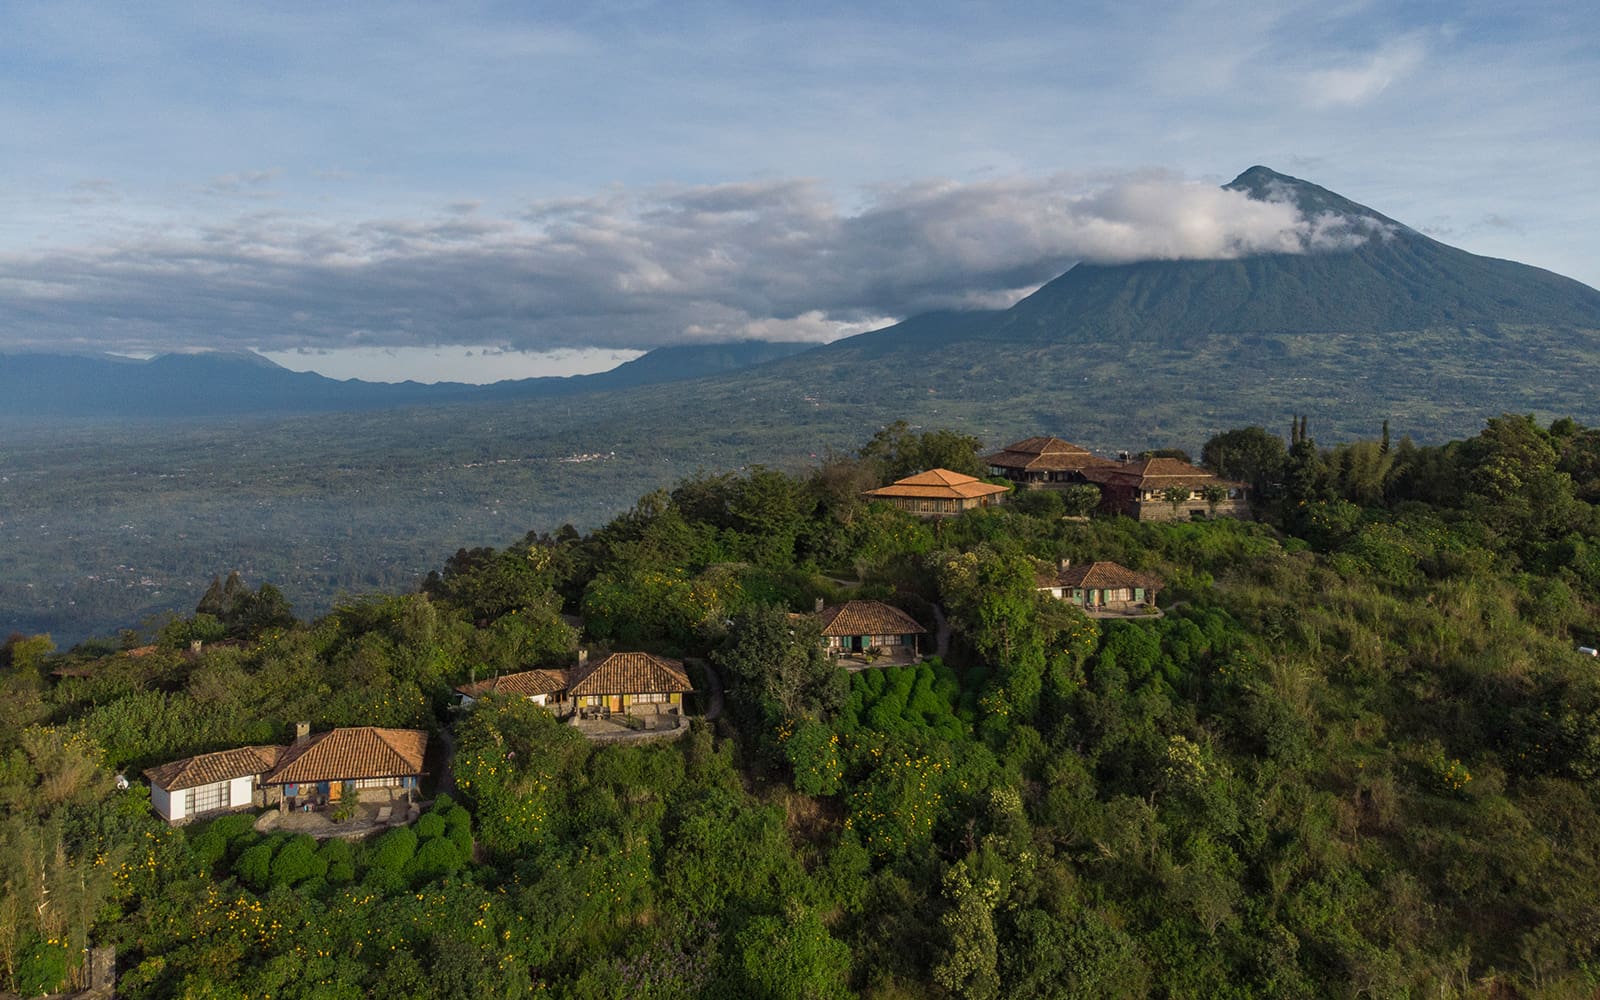 VIRUNGA LODGE COMES OUT ON TOP IN CONDÉ NAST TRAVELER’S 2022 READERS’ CHOICE AWARDS IN THE CATEGORY OF ‘BEST RESORTS IN THE REST OF AFRICA’!